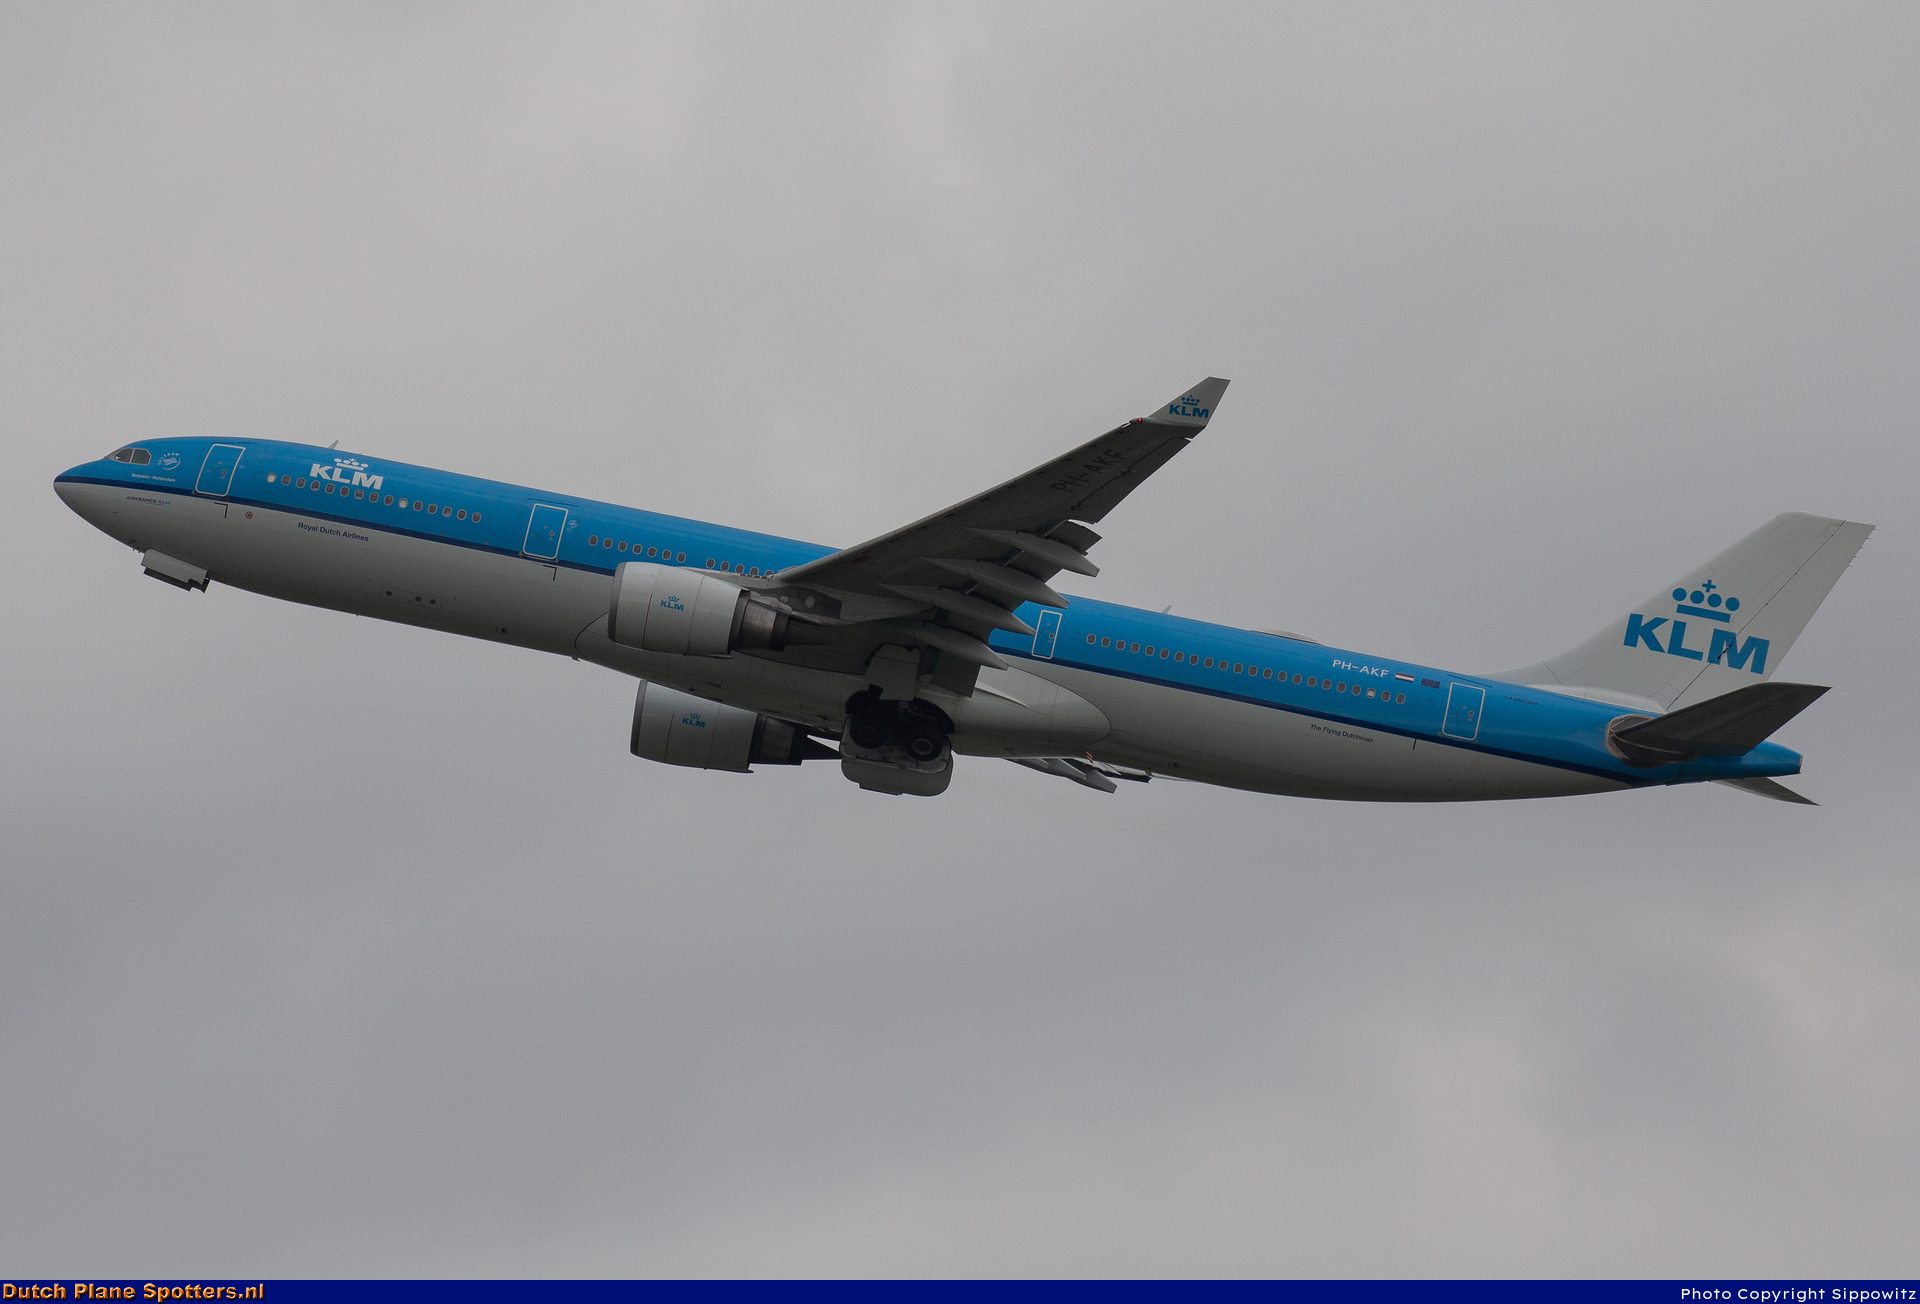 PH-AKF Airbus A330-300 KLM Royal Dutch Airlines by Sippowitz